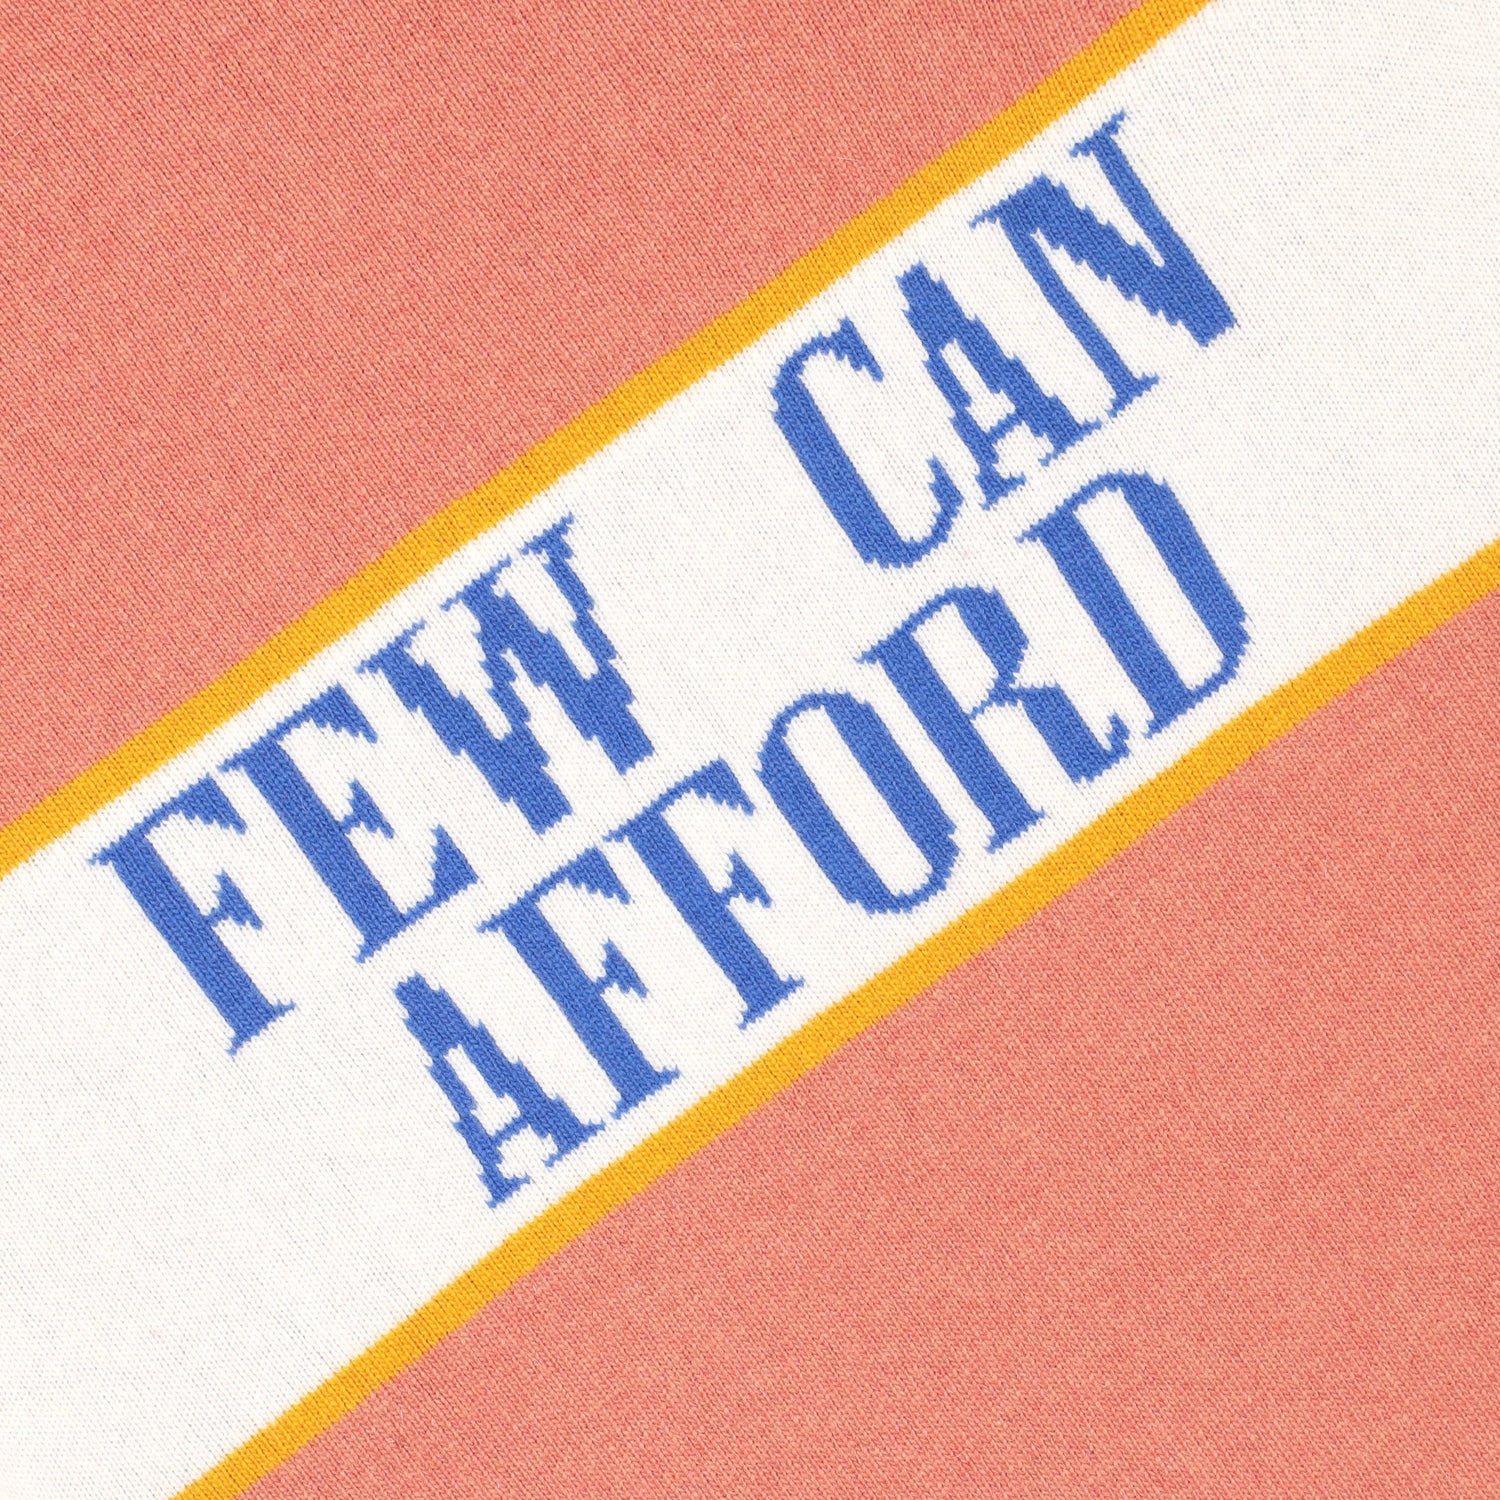 Detail of "FEW CAN AFFORD".